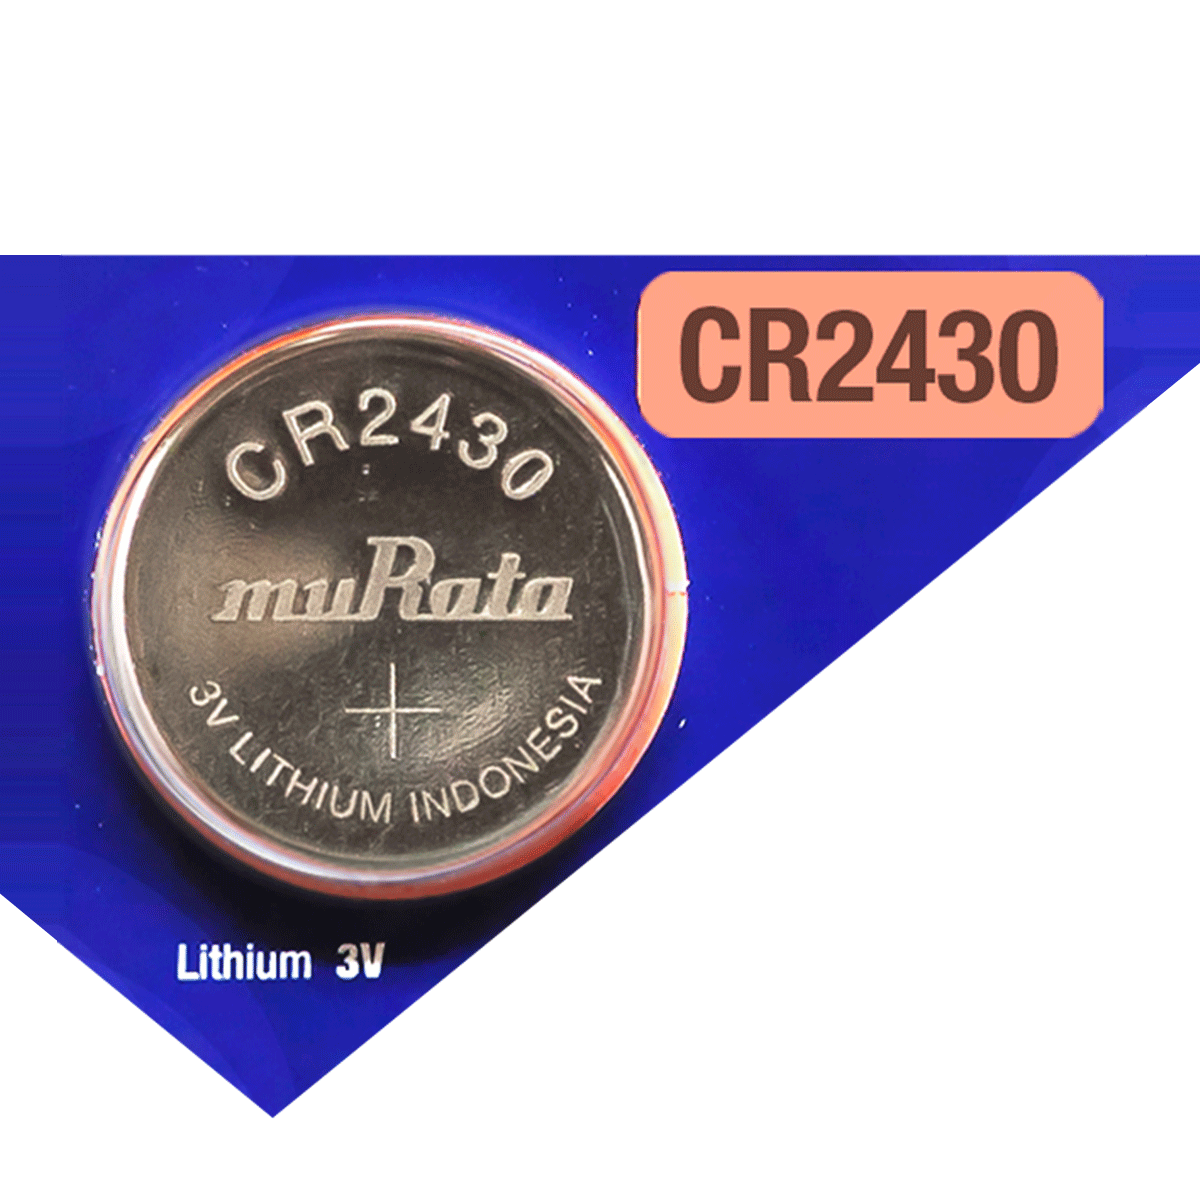 Murata CR2016 Battery 3V Lithium Coin Cell - Replaces Sony CR2016 (5  Batteries)